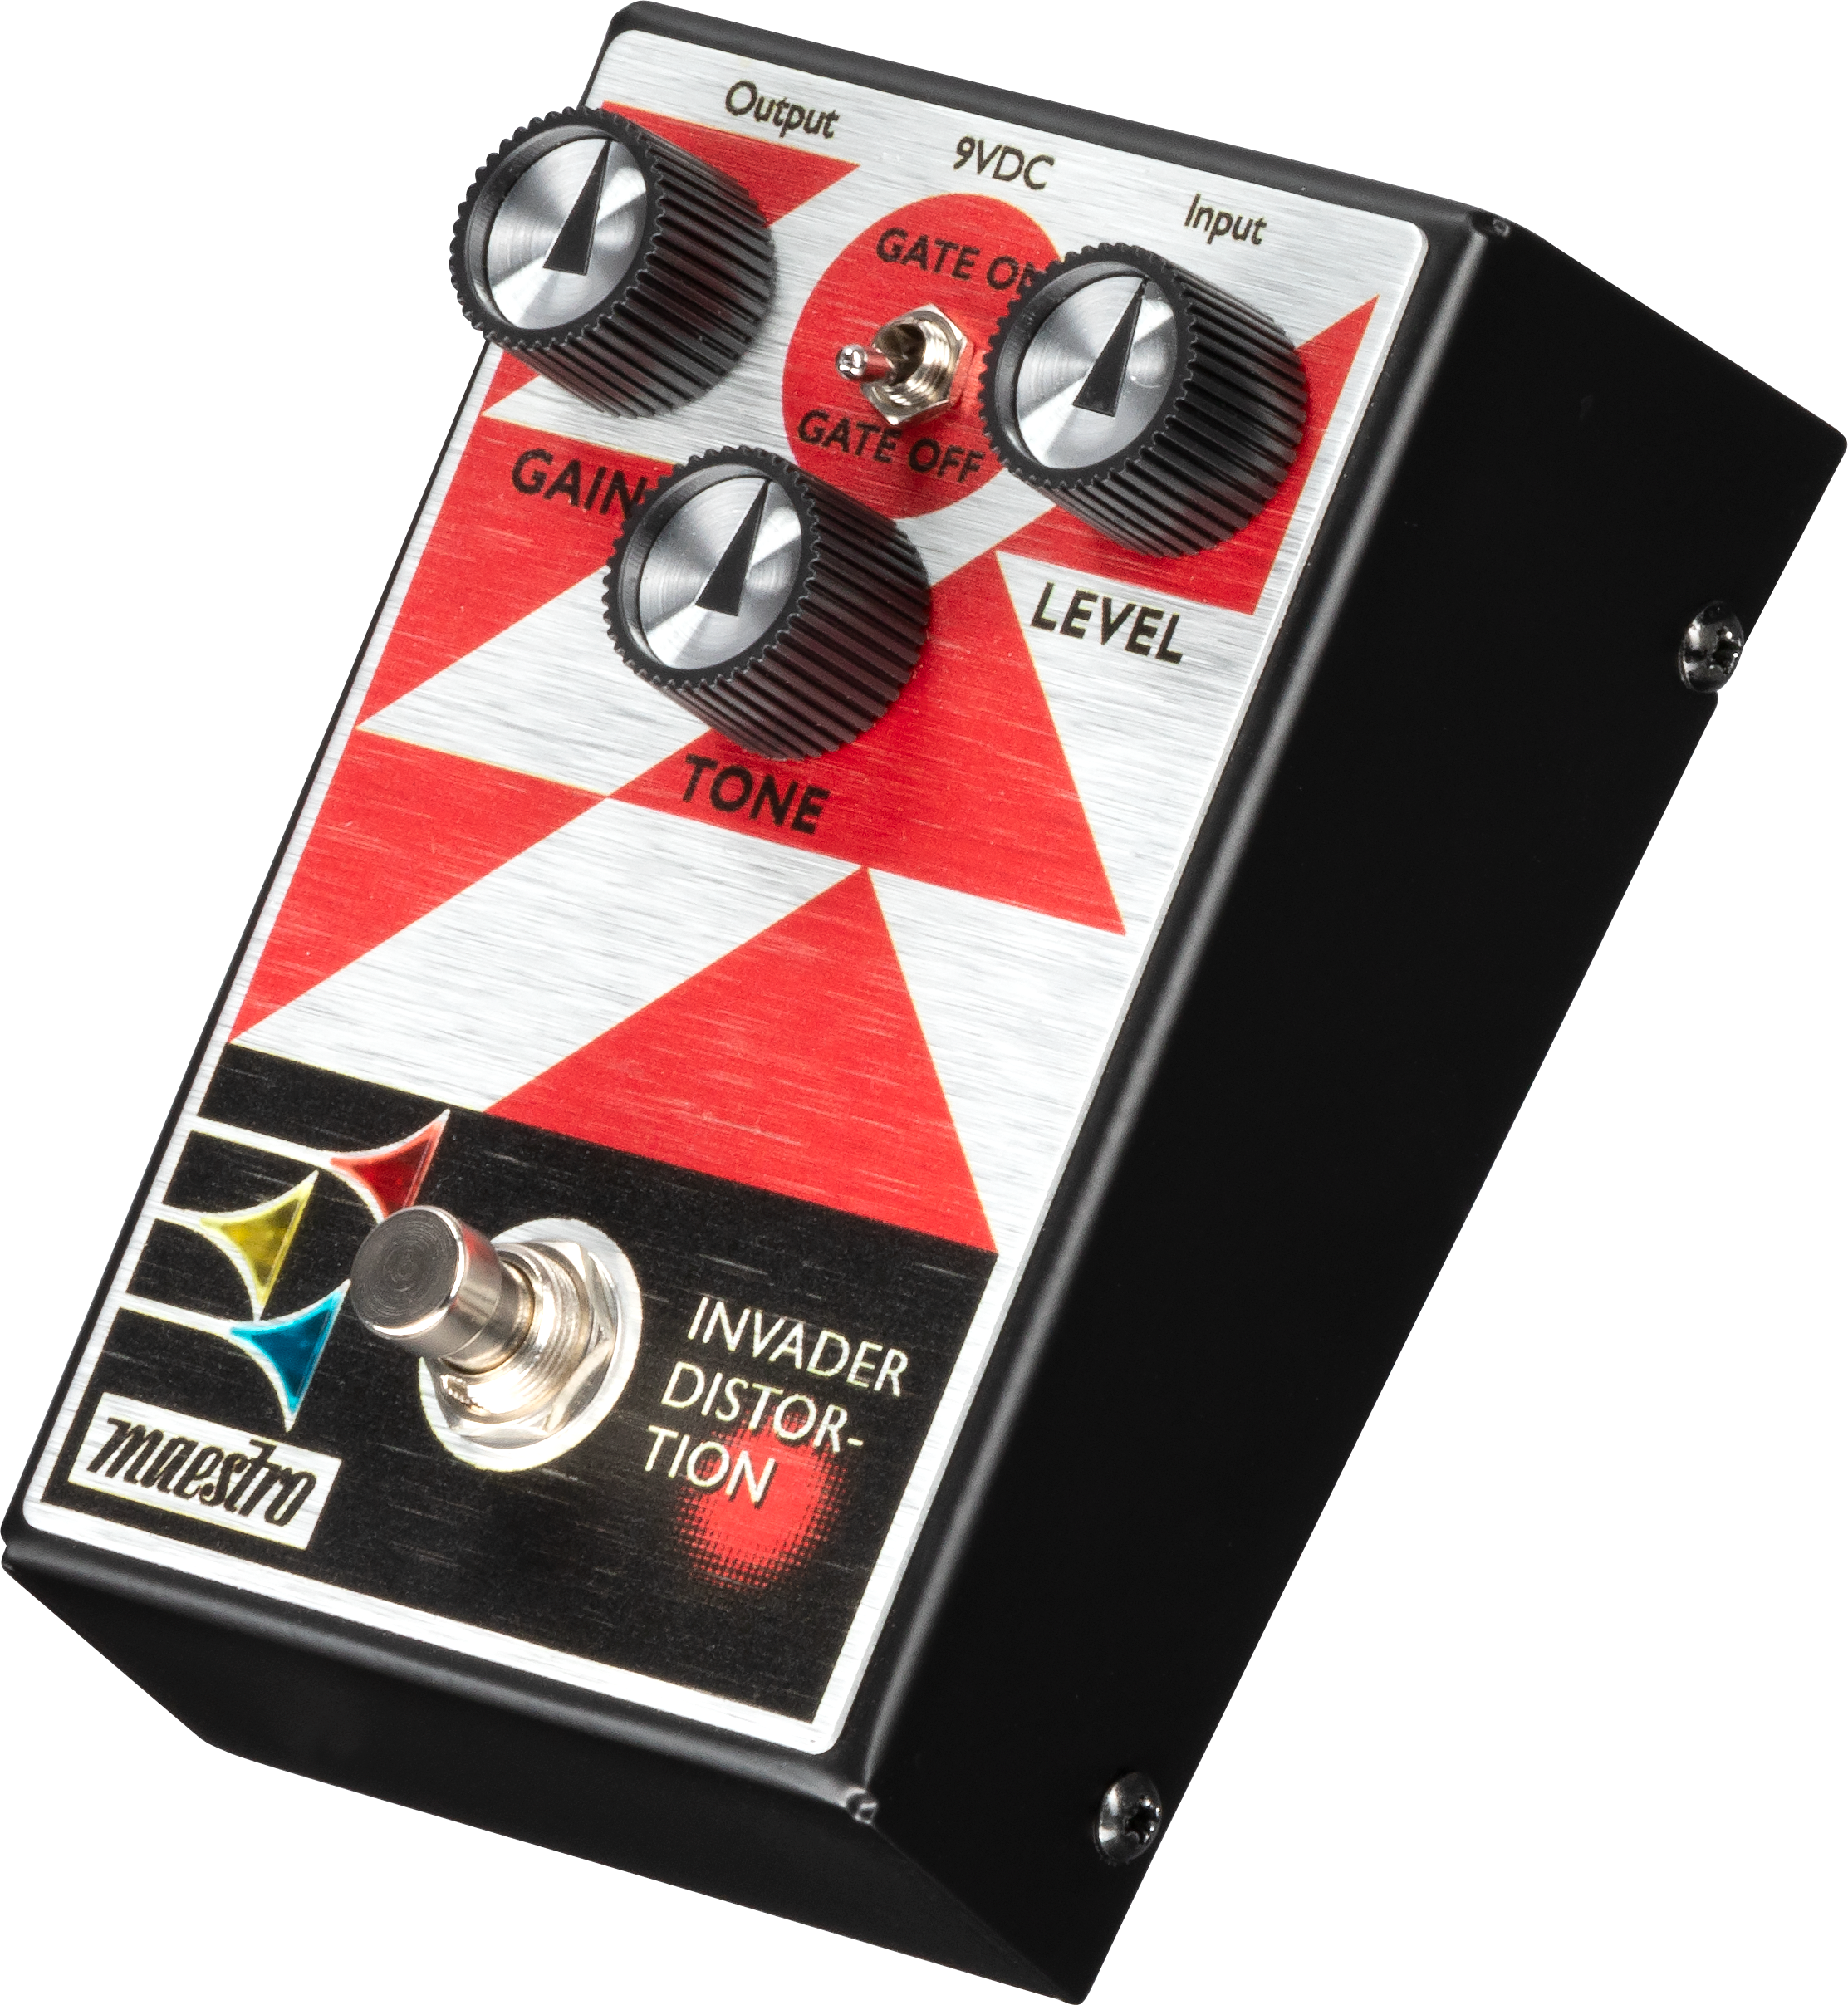 Distortion pedal with gate